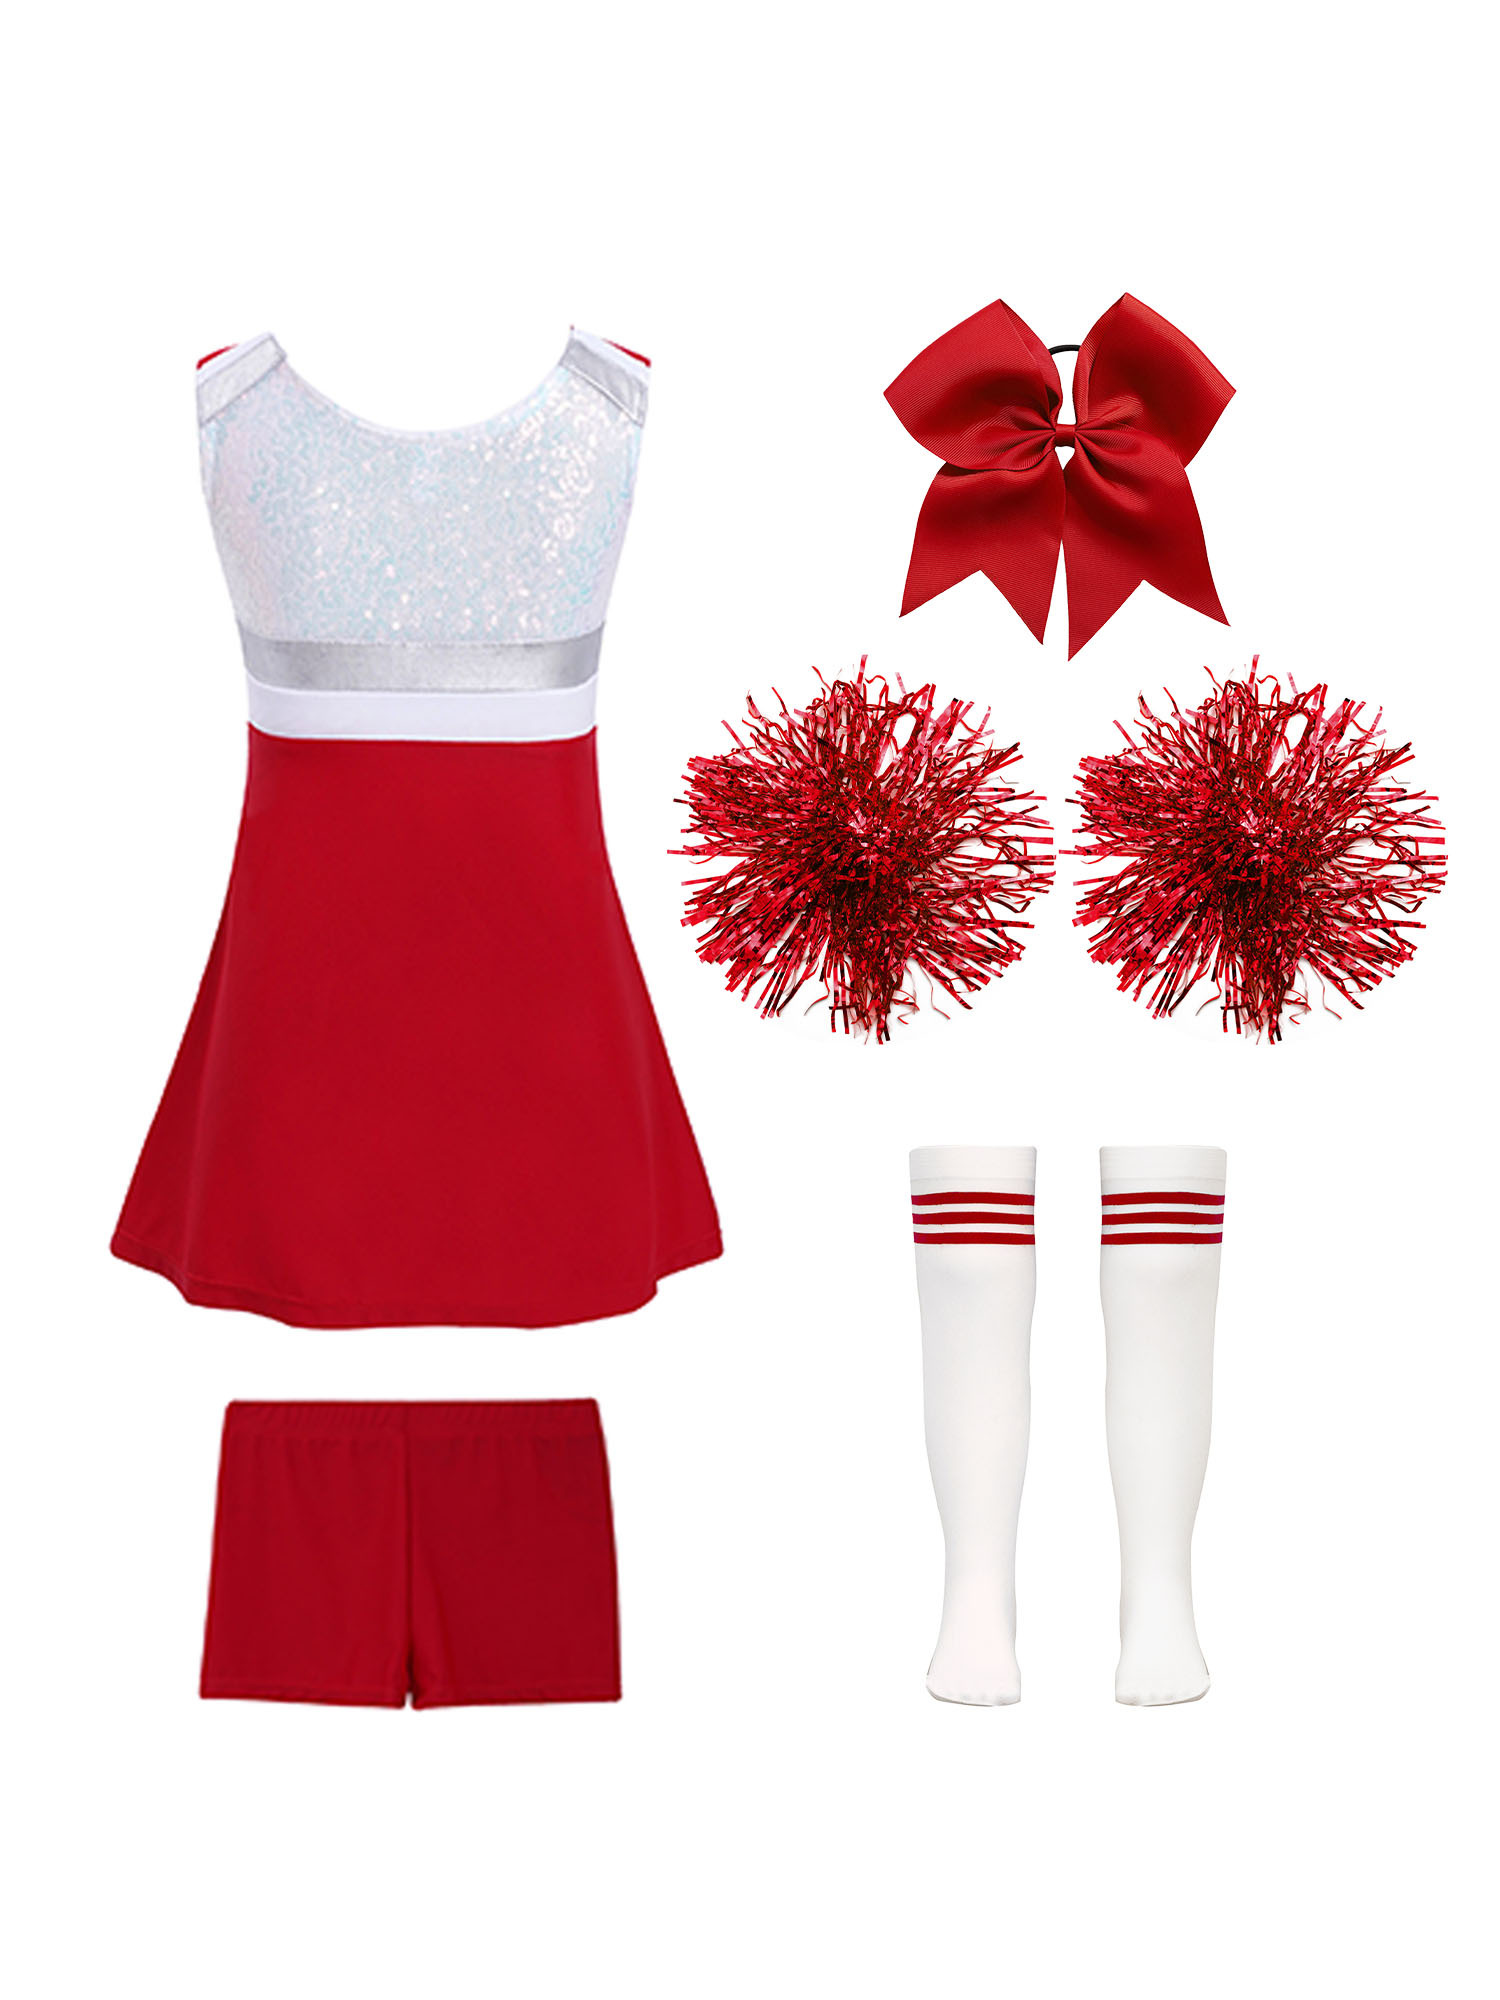 TiaoBug Kids Girls Cheer Leader Uniform Sports Games Cheerleading Dance Outfits Halloween Carnival Fancy Dress Up B Red 8 - image 2 of 5